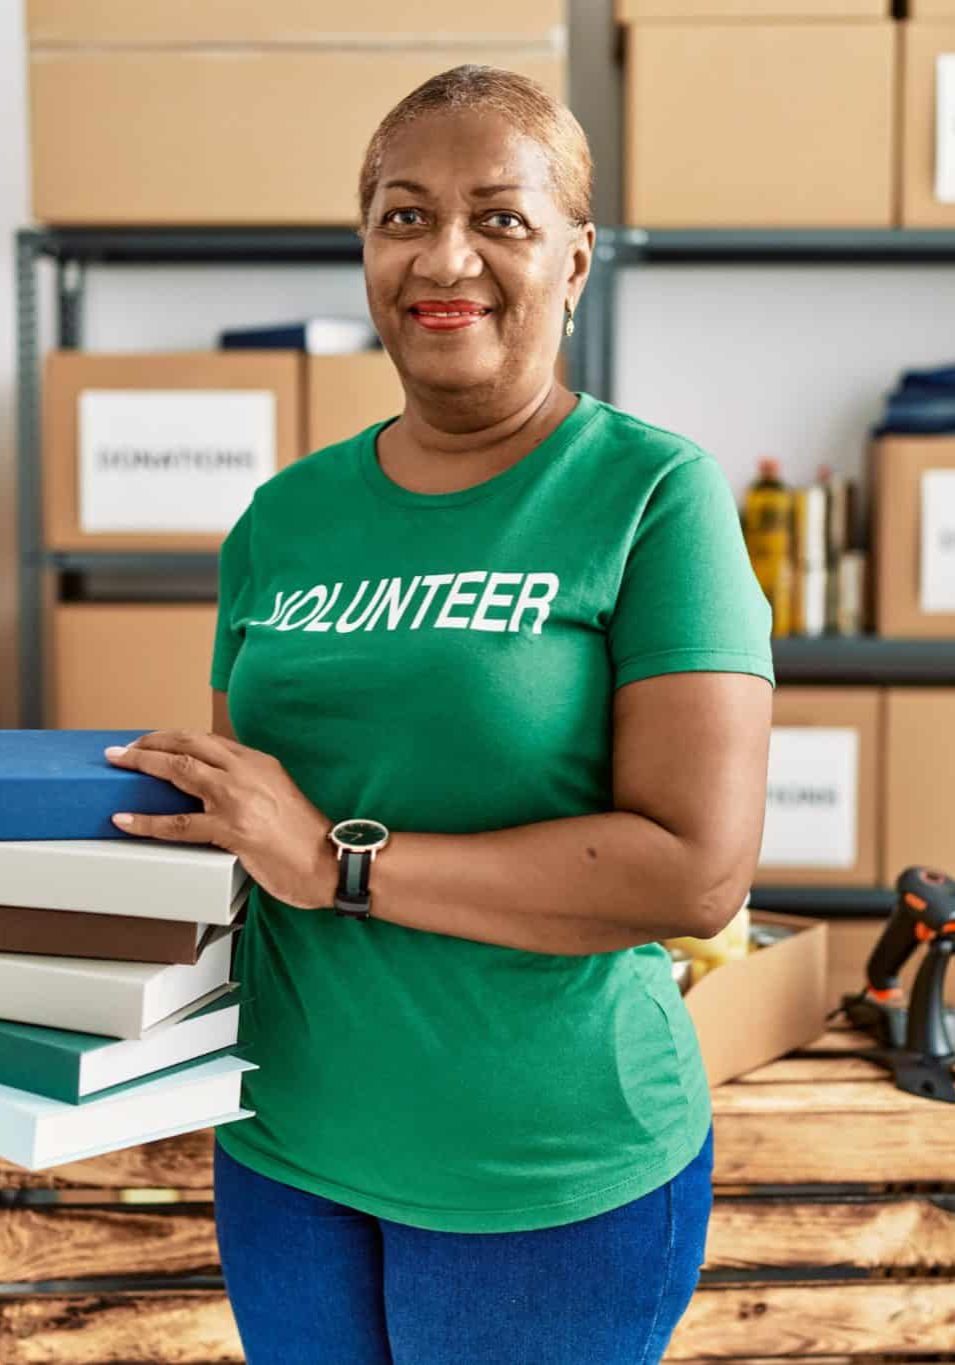 Senior African American Woman Wearing Volunteer Uniform Holding Books At Charity Center